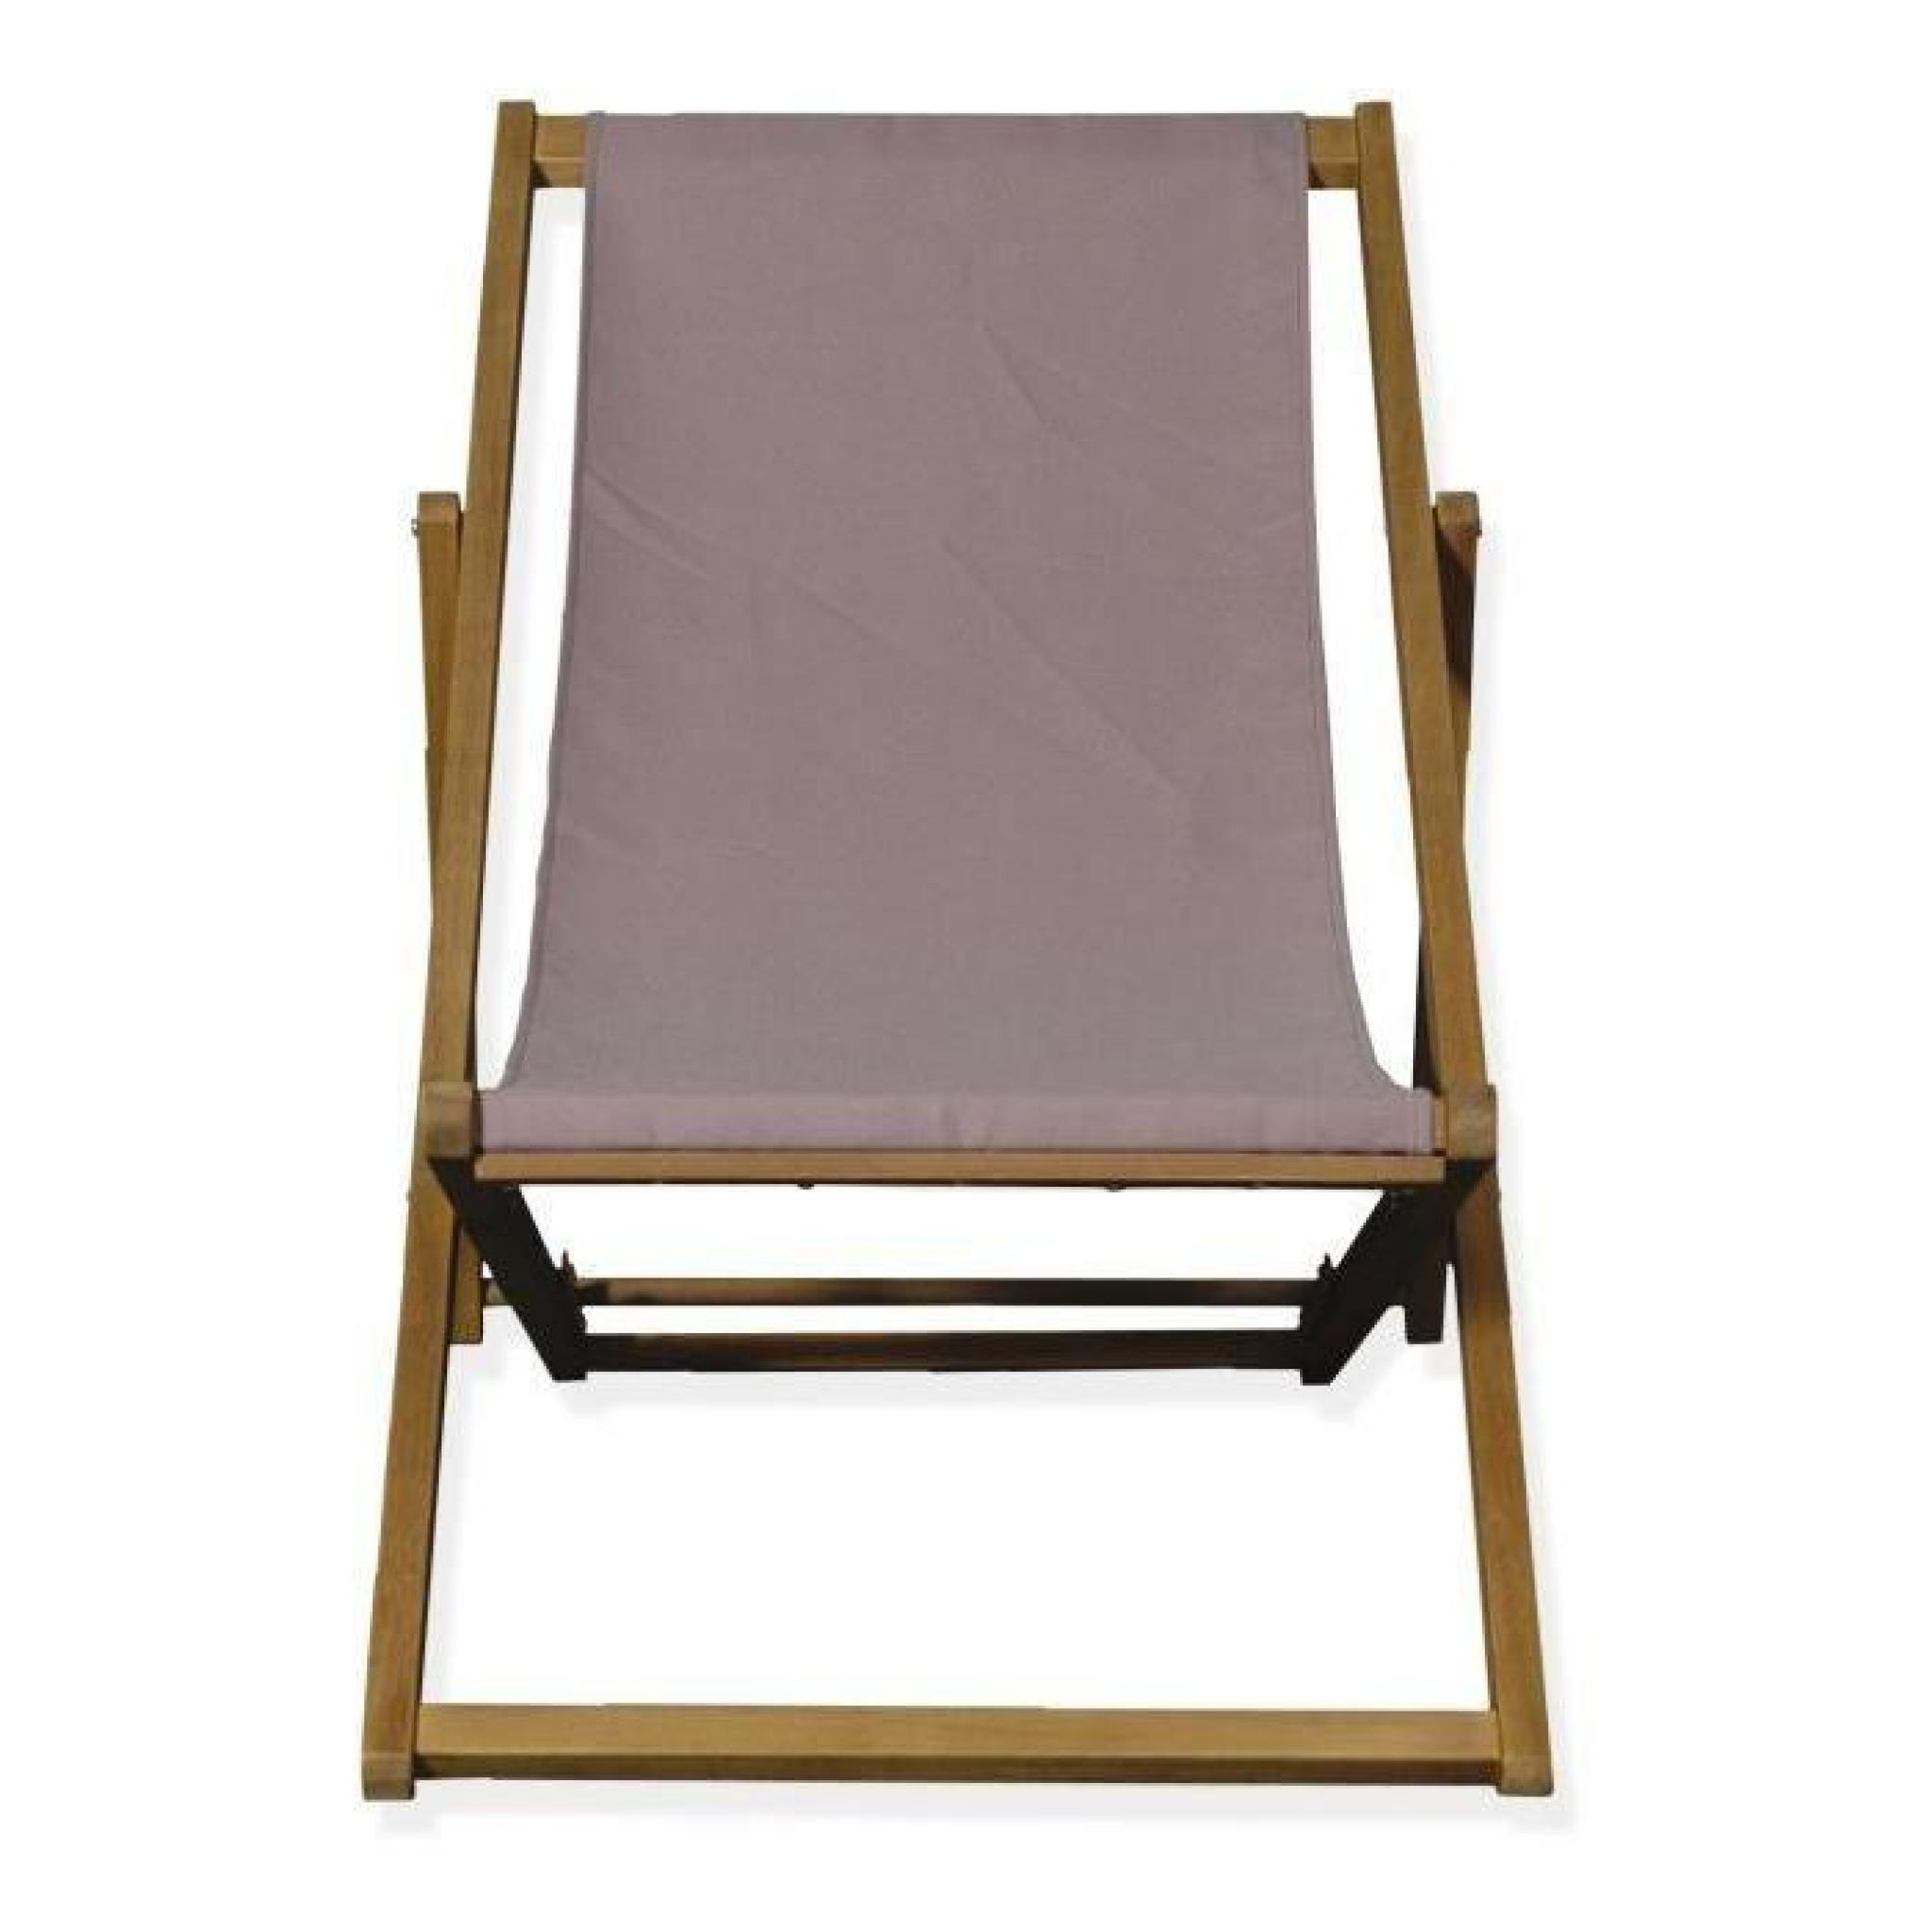 Udine Chilienne / Chaise longue de jardin taupe - Taupe